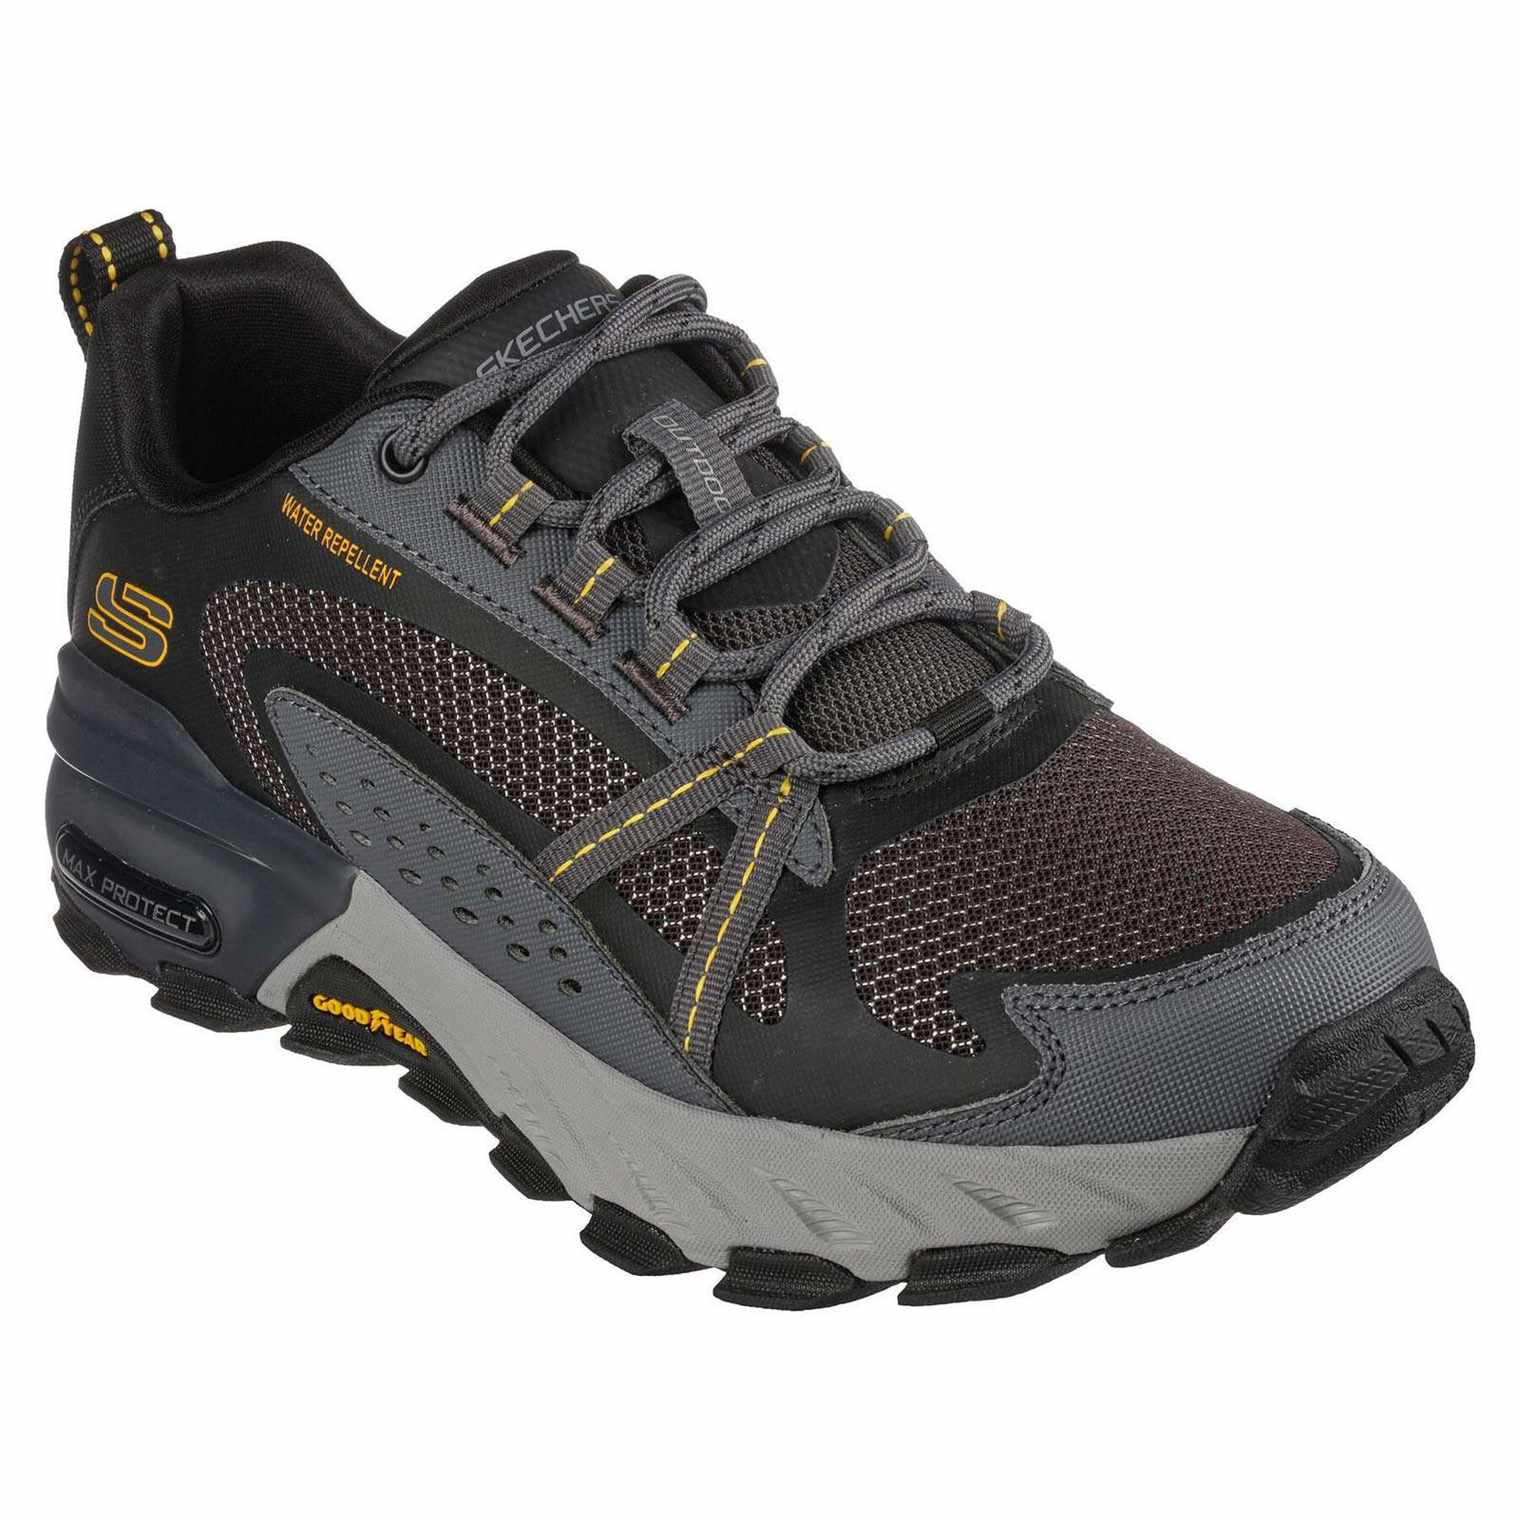 SKECHERS MAX PROTECT MENS OUTDOOR SHOES